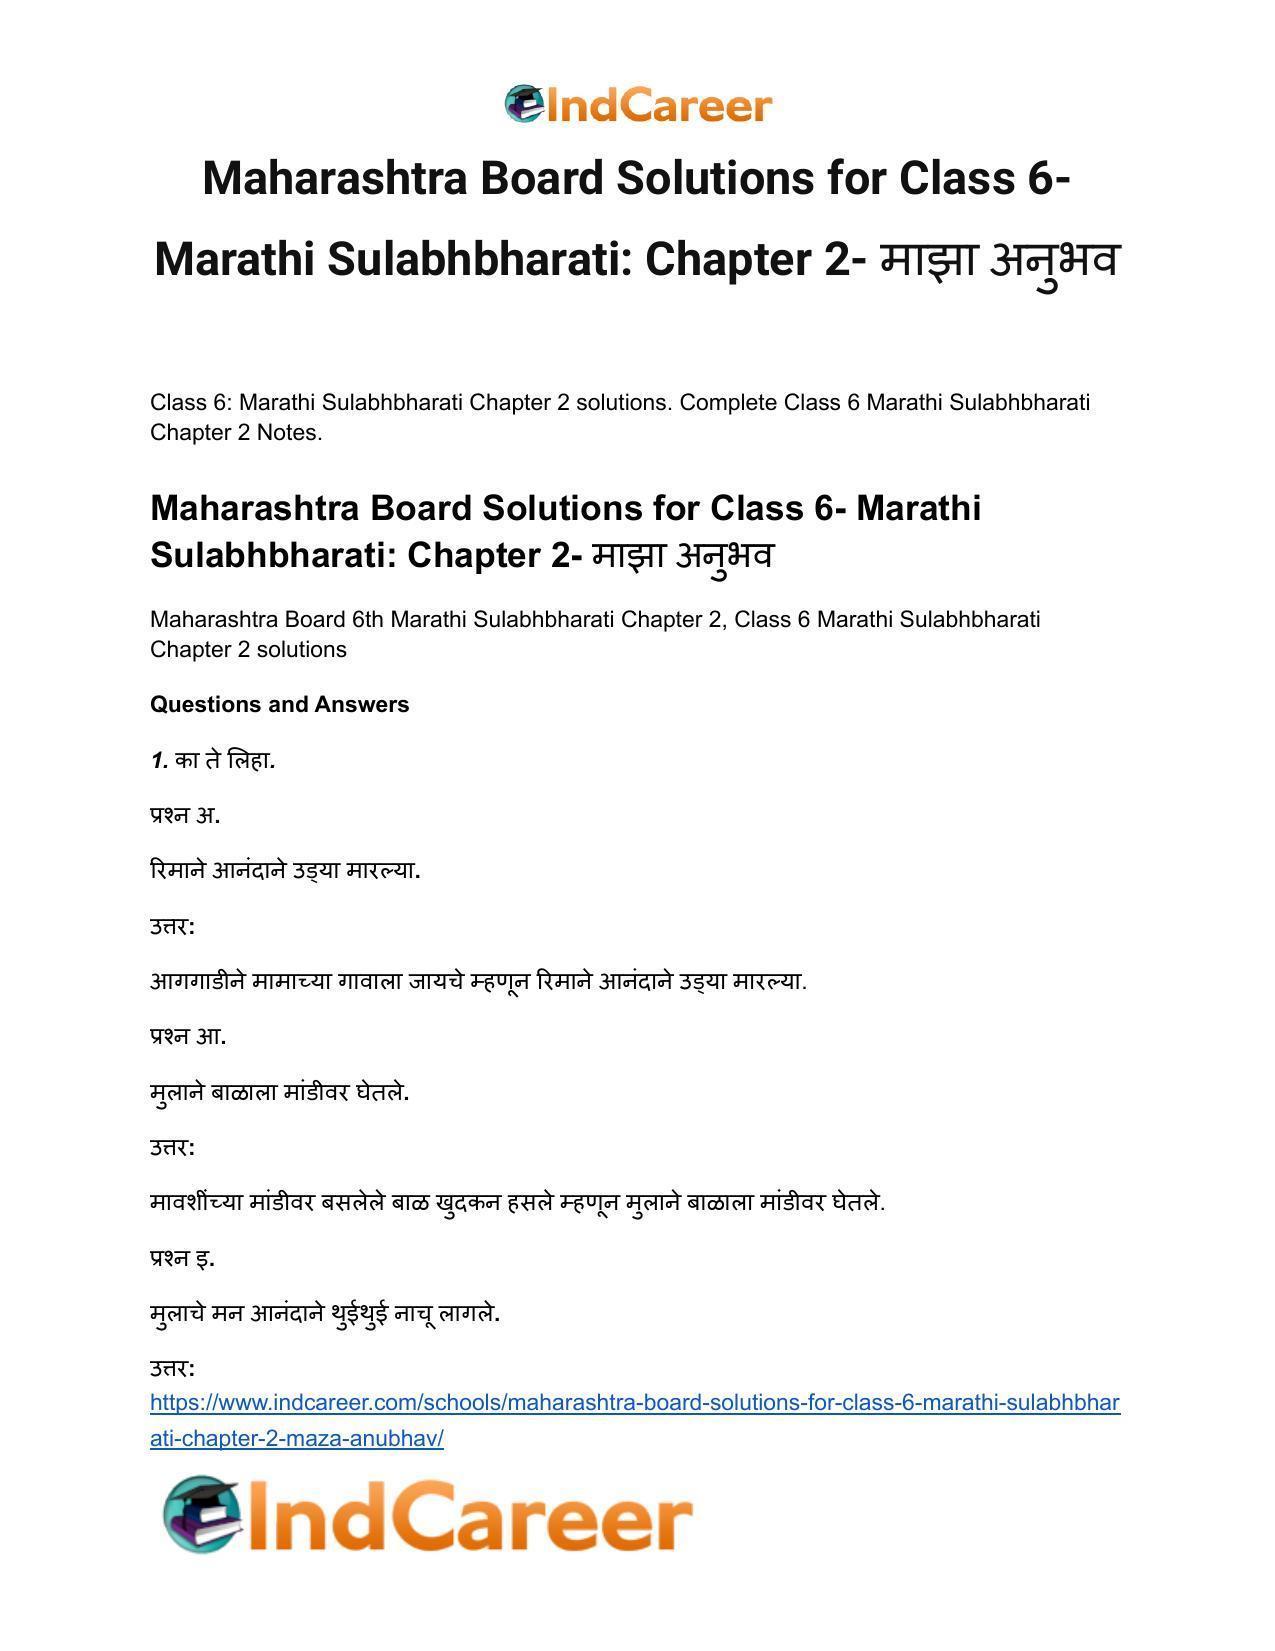 Maharashtra Board Solutions for Class 6- Marathi Sulabhbharati: Chapter 2- माझा अनुभव - Page 2